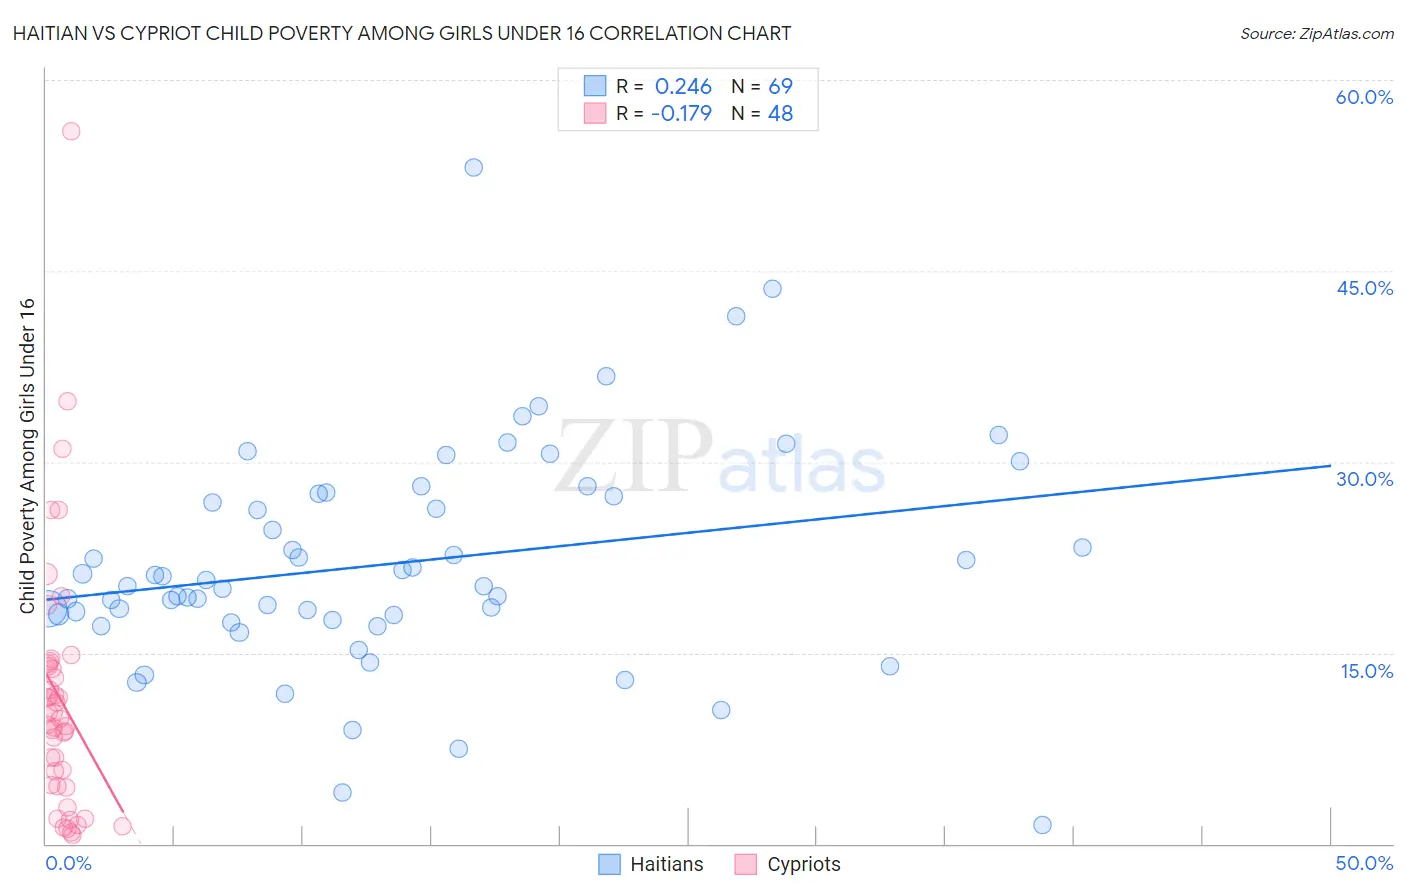 Haitian vs Cypriot Child Poverty Among Girls Under 16